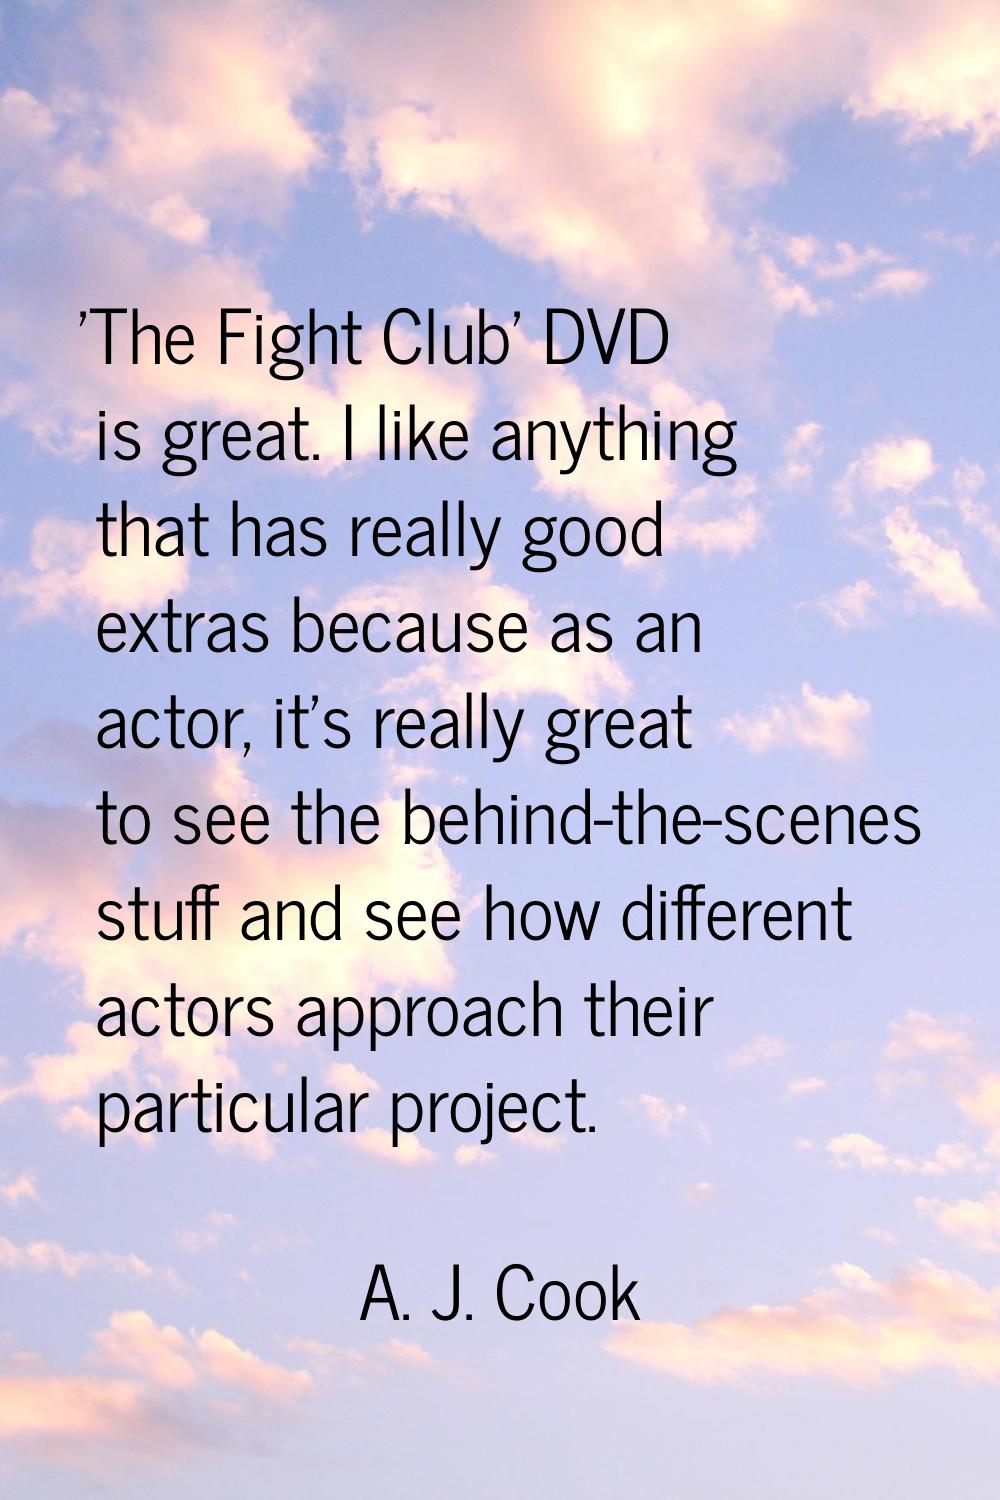 'The Fight Club' DVD is great. I like anything that has really good extras because as an actor, it'